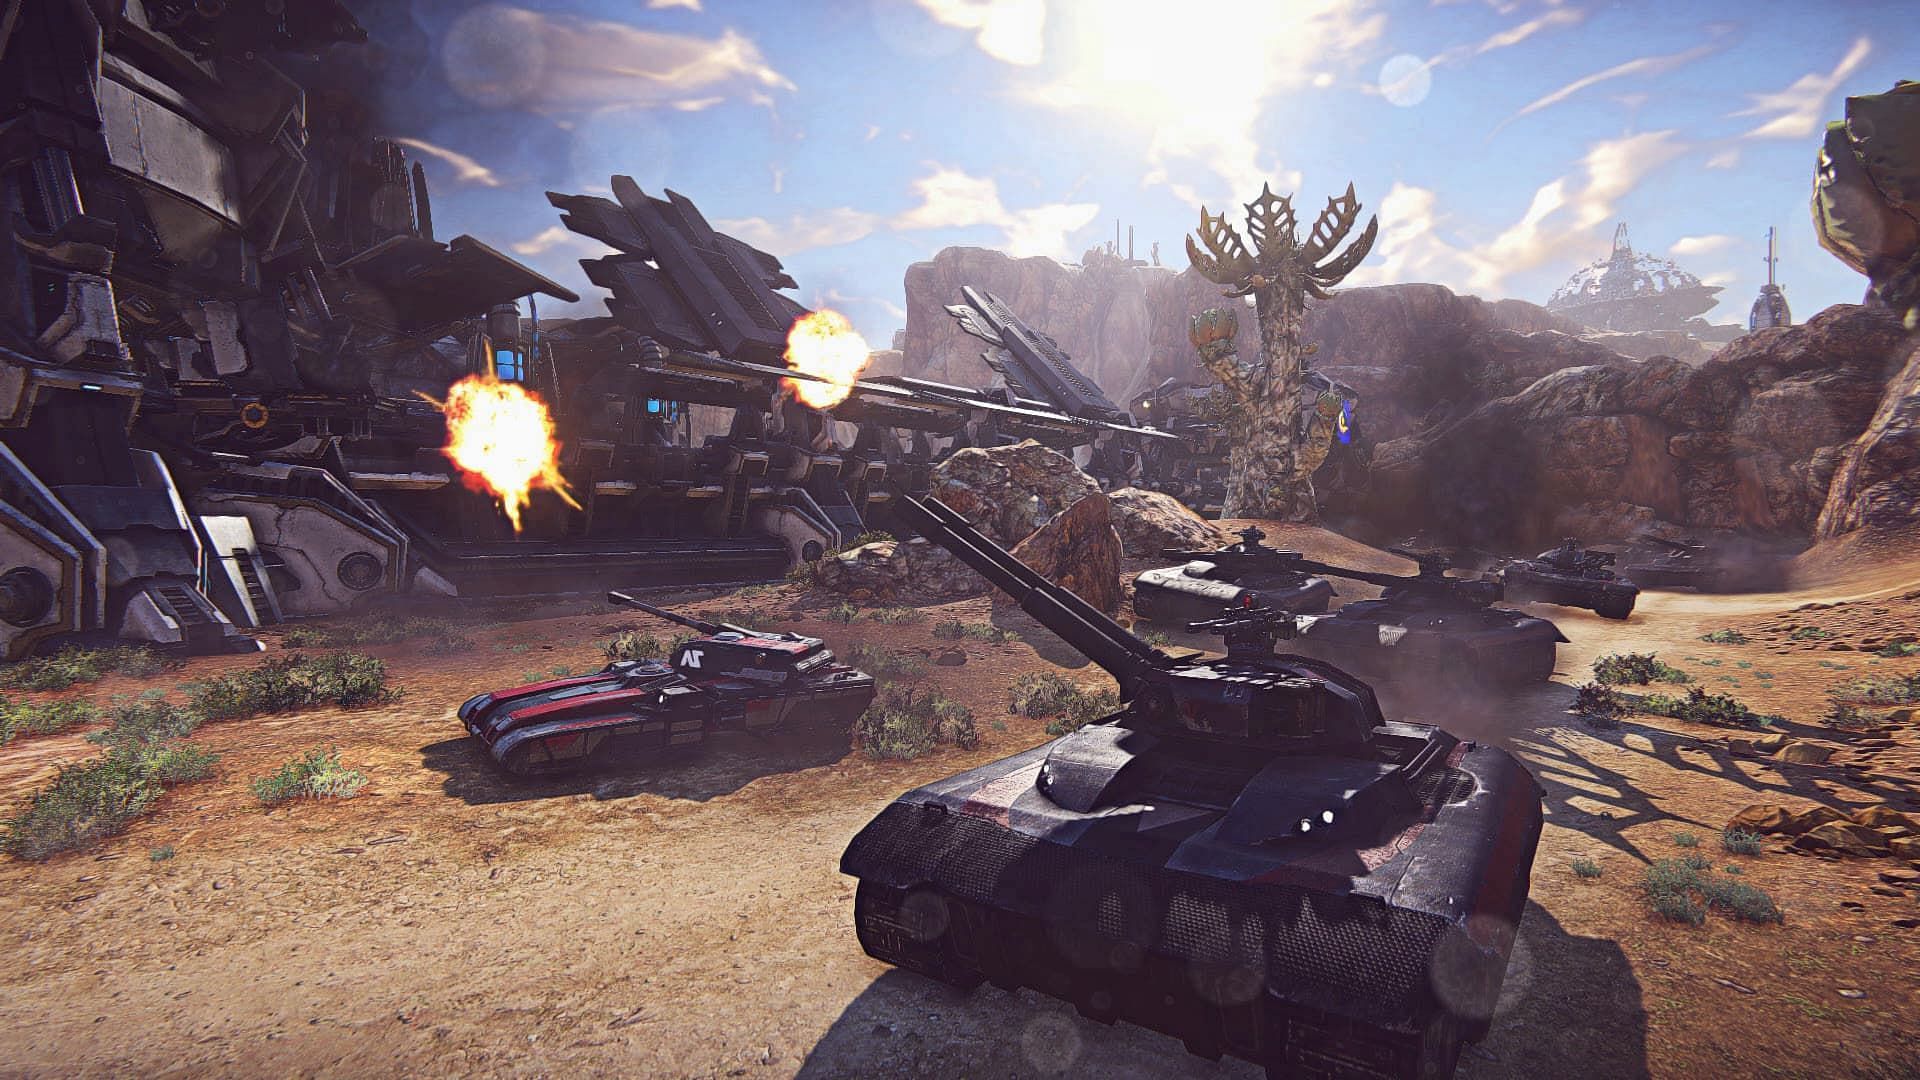 Planetside 2 is a game that established the MMOFPS genre (Image via Daybreak Game Company)